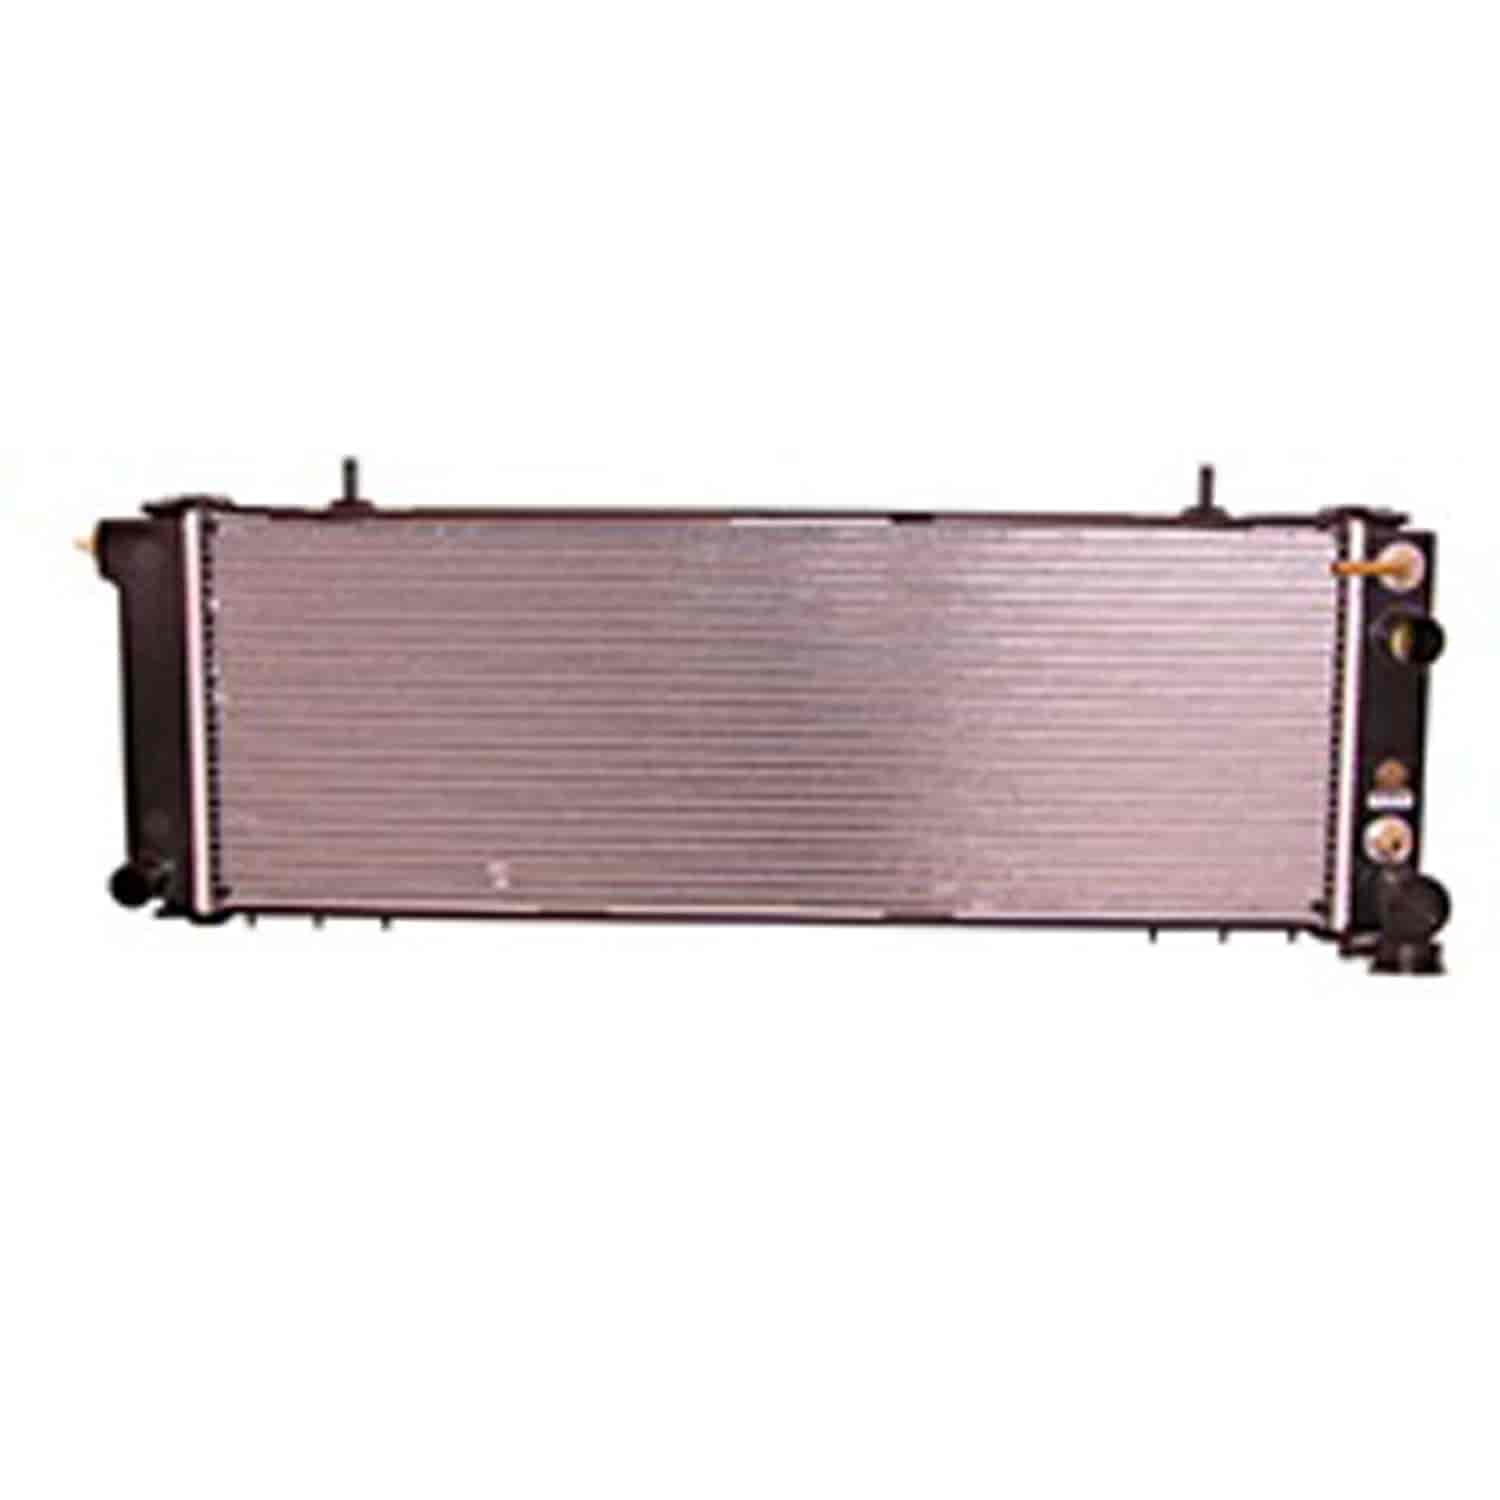 This 1 row radiator from Omix-ADA fits 2001 Cherokee 4.0L with or without AC manual or automatic transmission.